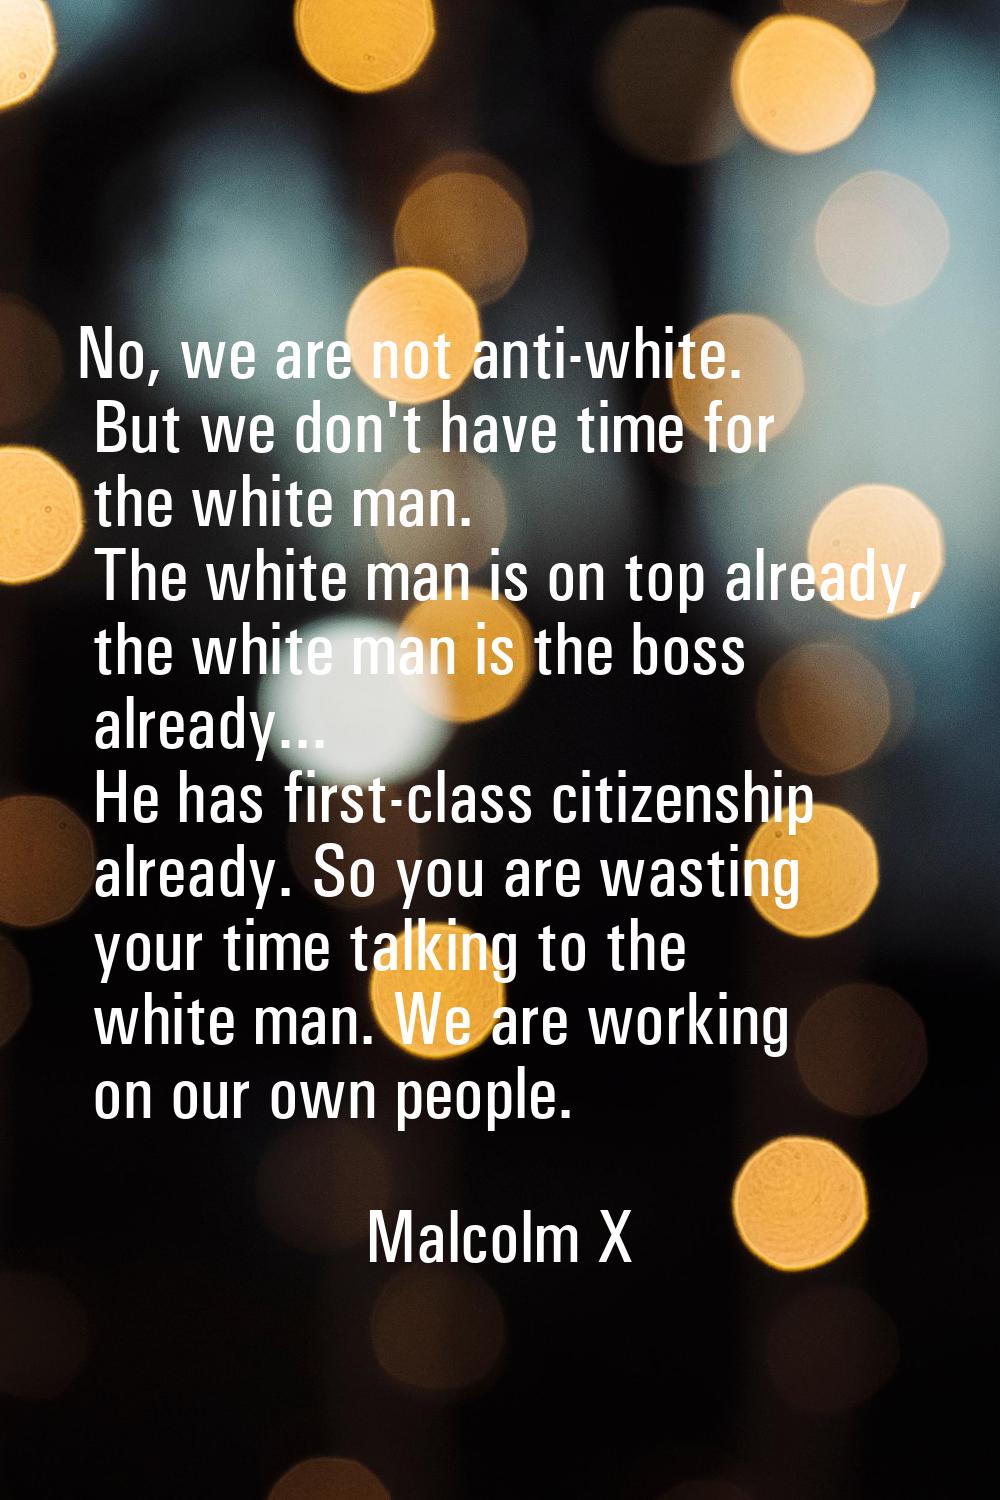 No, we are not anti-white. But we don't have time for the white man. The white man is on top alread